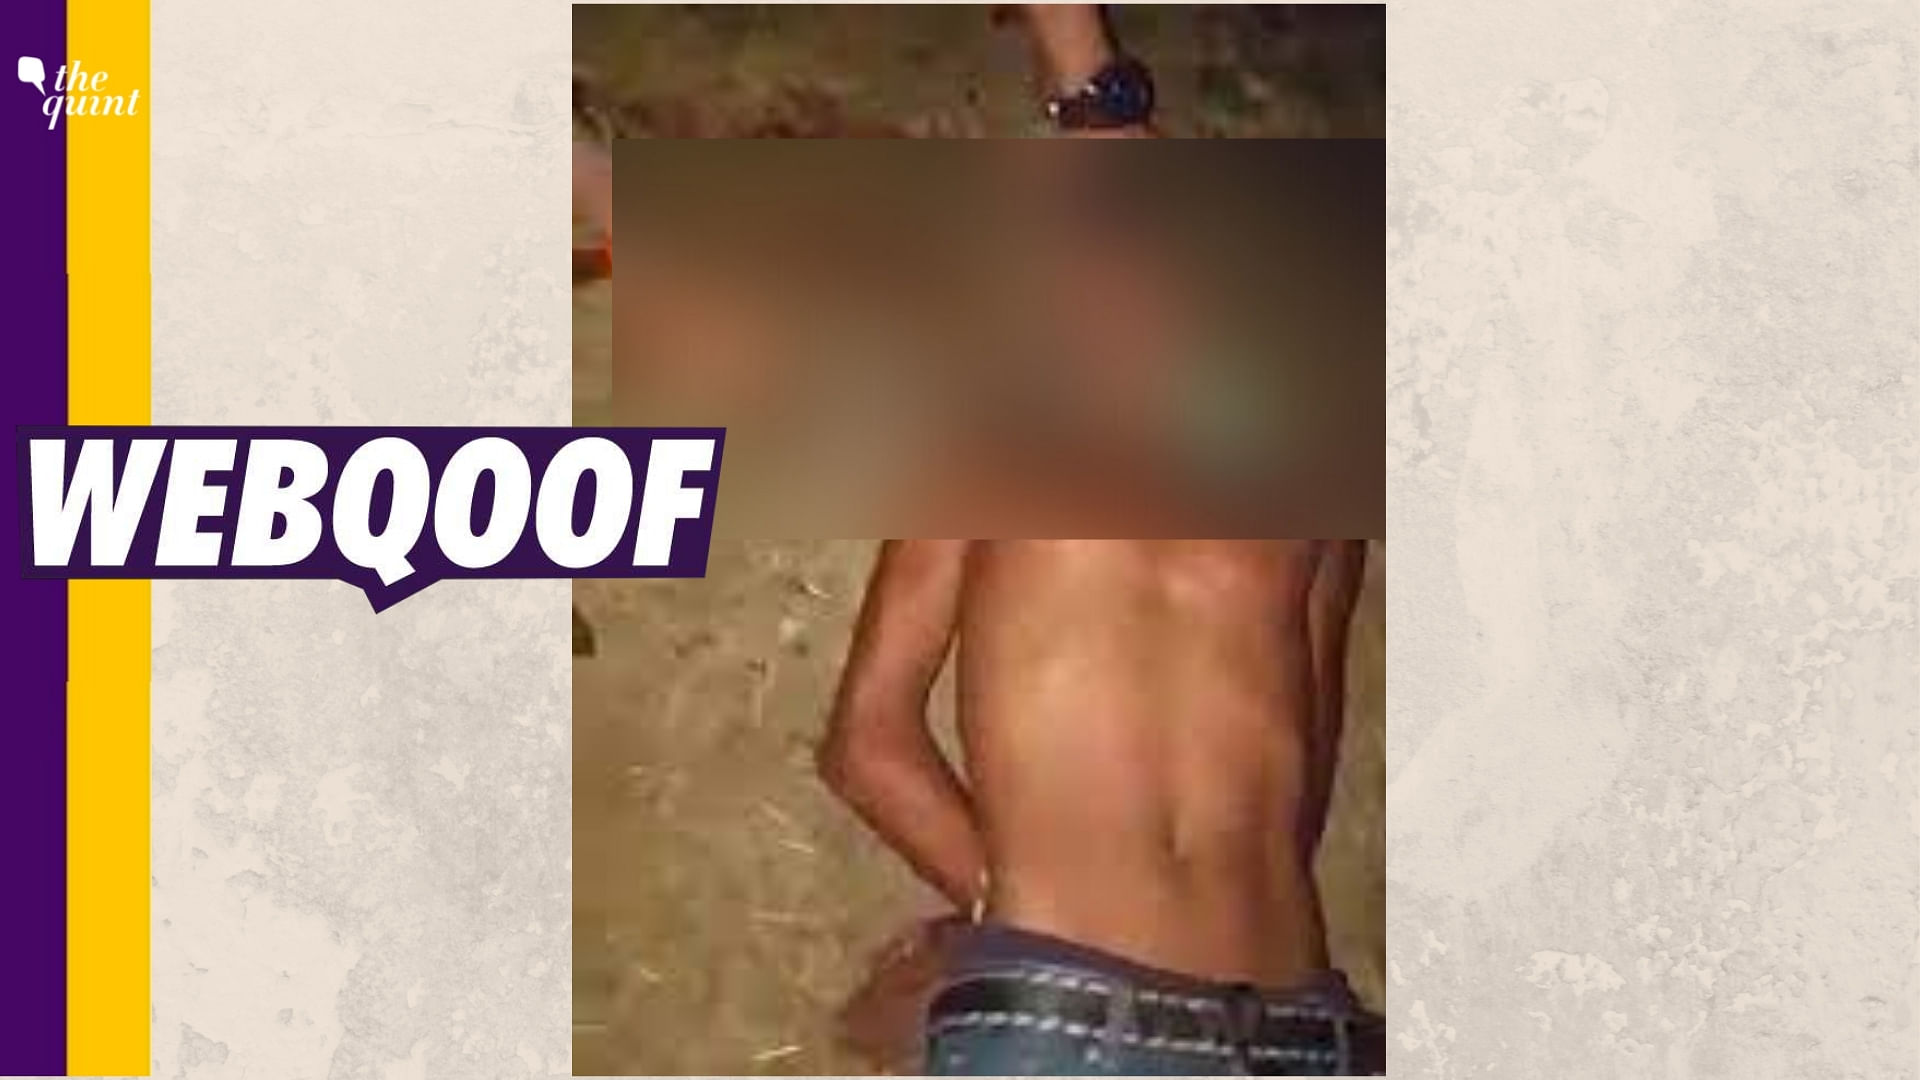 A WhatsApp video is doing the rounds which shows a minor boy being beheaded and shared saying it is related to post-poll violence in Bengal.